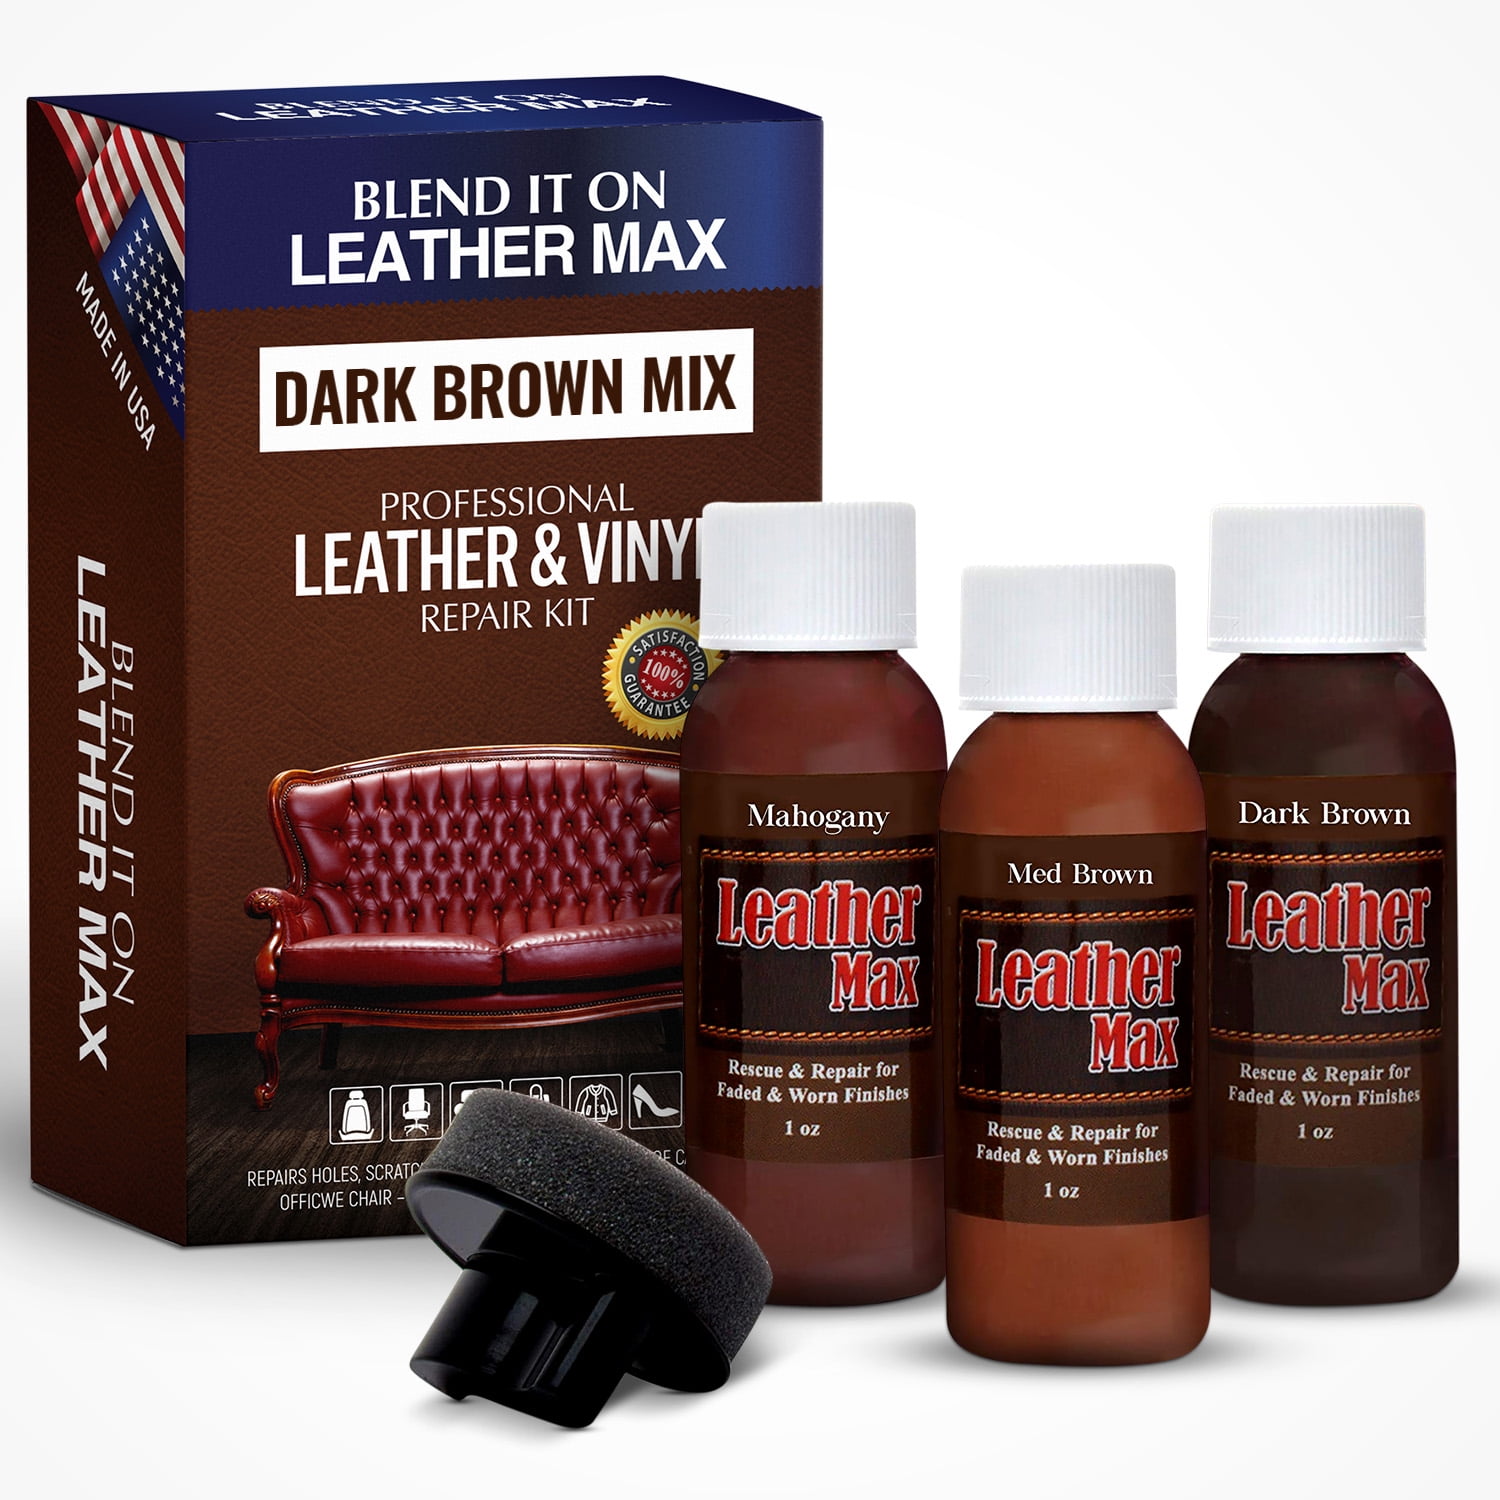 Leather Hero Leather color Restorer for couches, Leather Scratch Remover,  Leather couch Scratch Repair for Furniture and car Sea